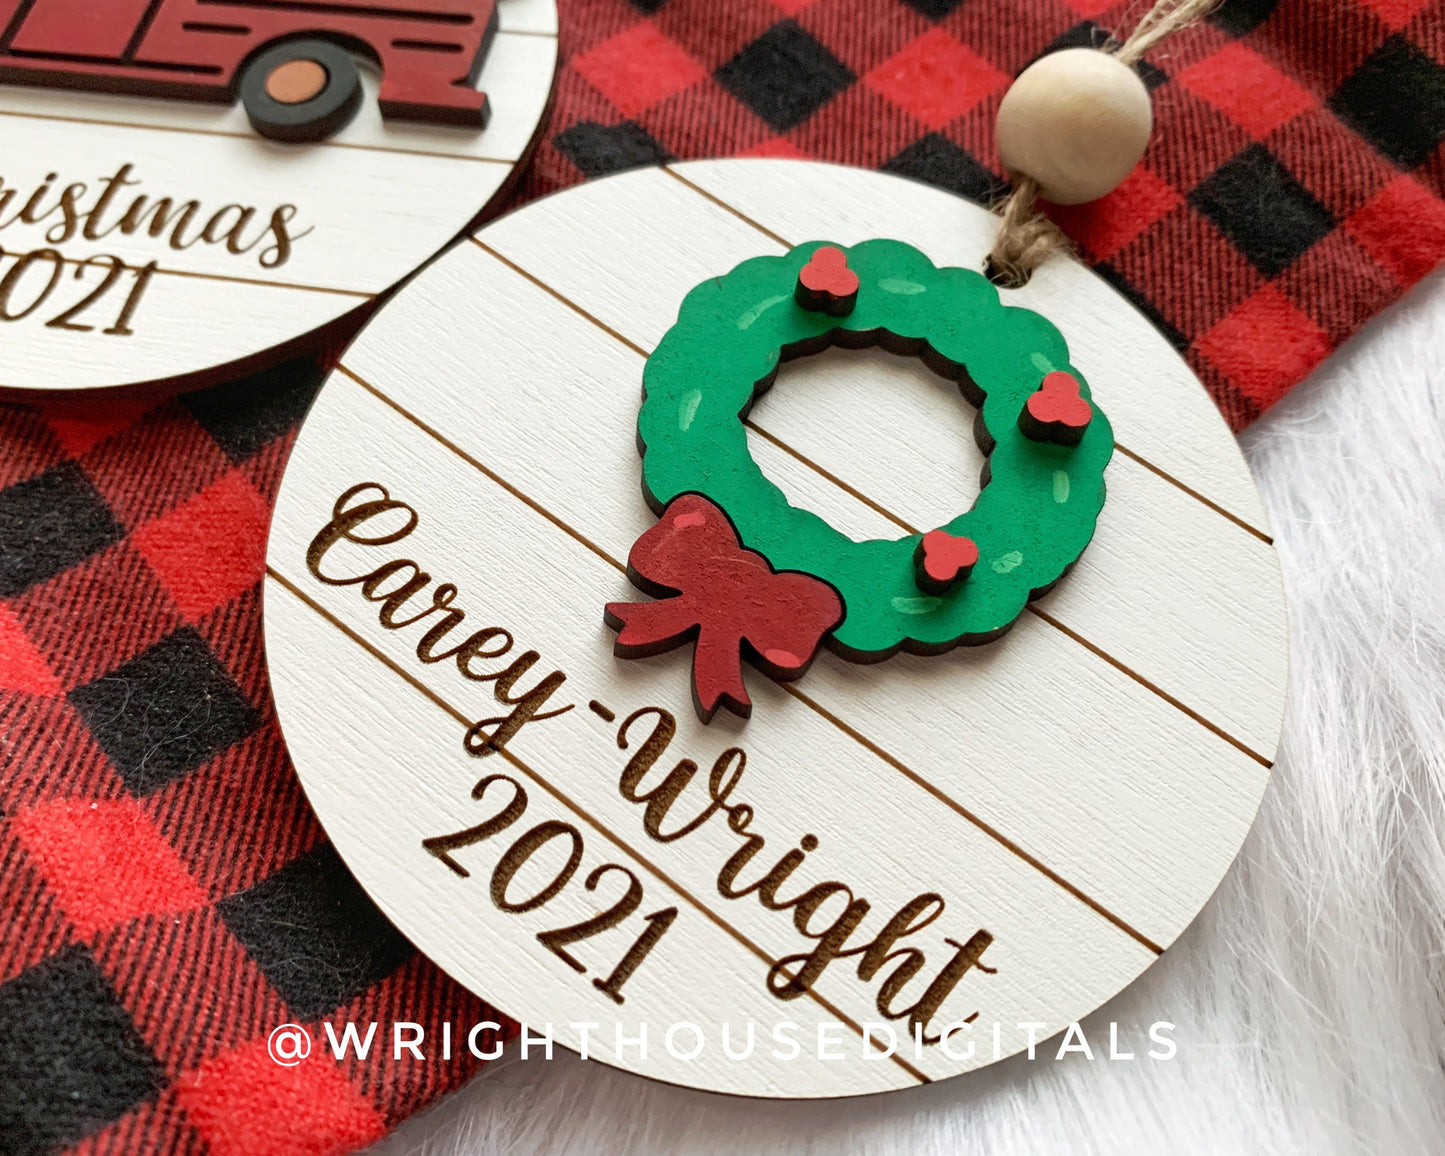 Personalized Farmhouse - Vintage Truck - Holly Wreath - Laser Engraved Shiplap - Stocking Tag - Wooden Christmas 2023 Tree Ornaments